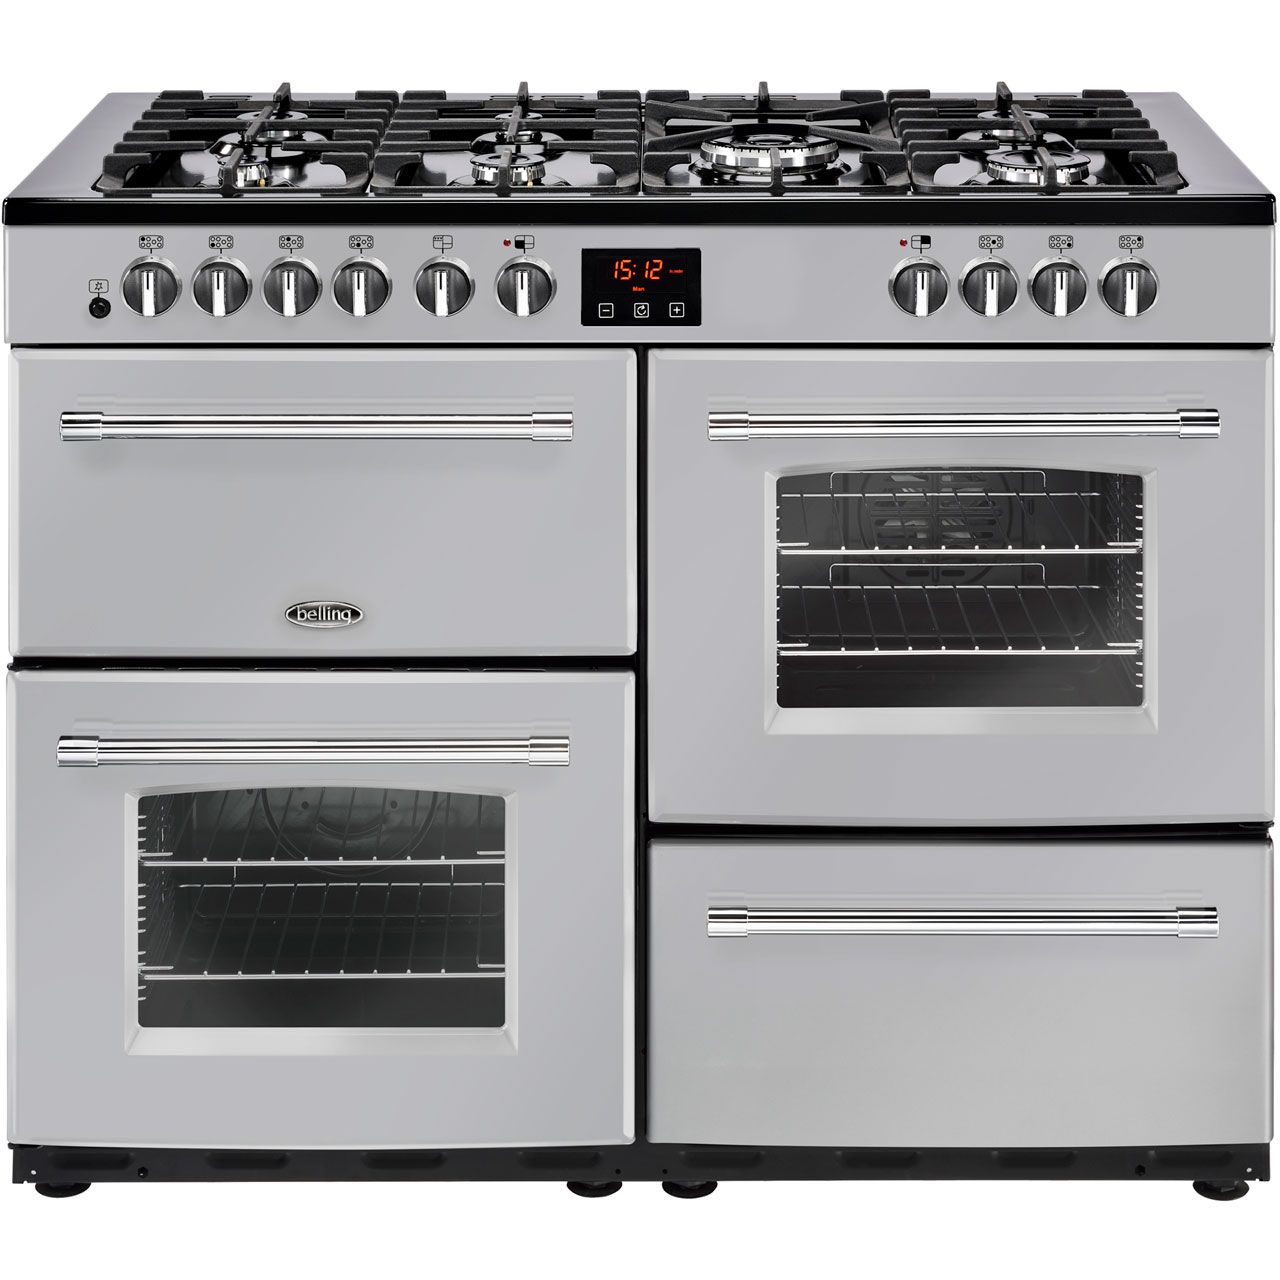 Belling Farmhouse110DF 110cm Dual Fuel Range Cooker - Silver - A/A Rated, Silver